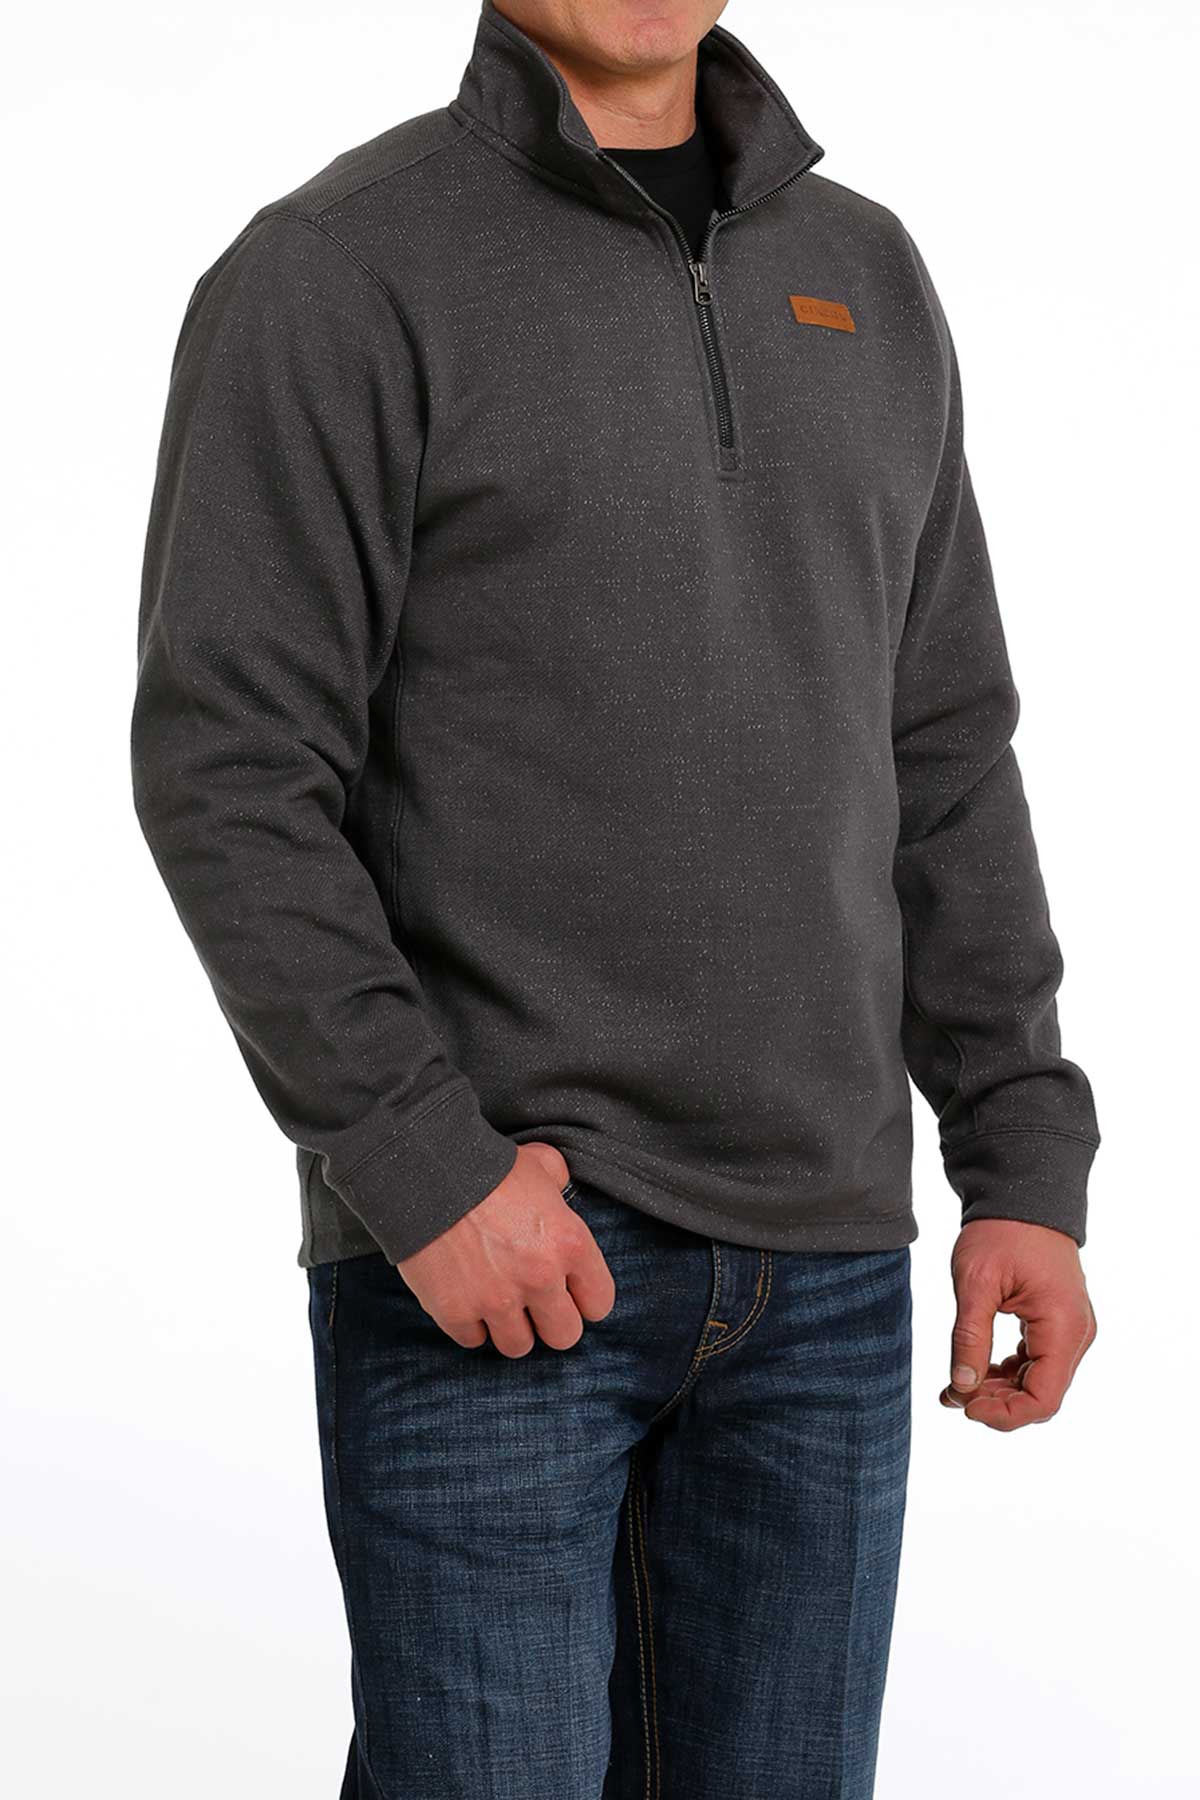 Cinch Big and Tall Ivory Quarter Zip Pullover